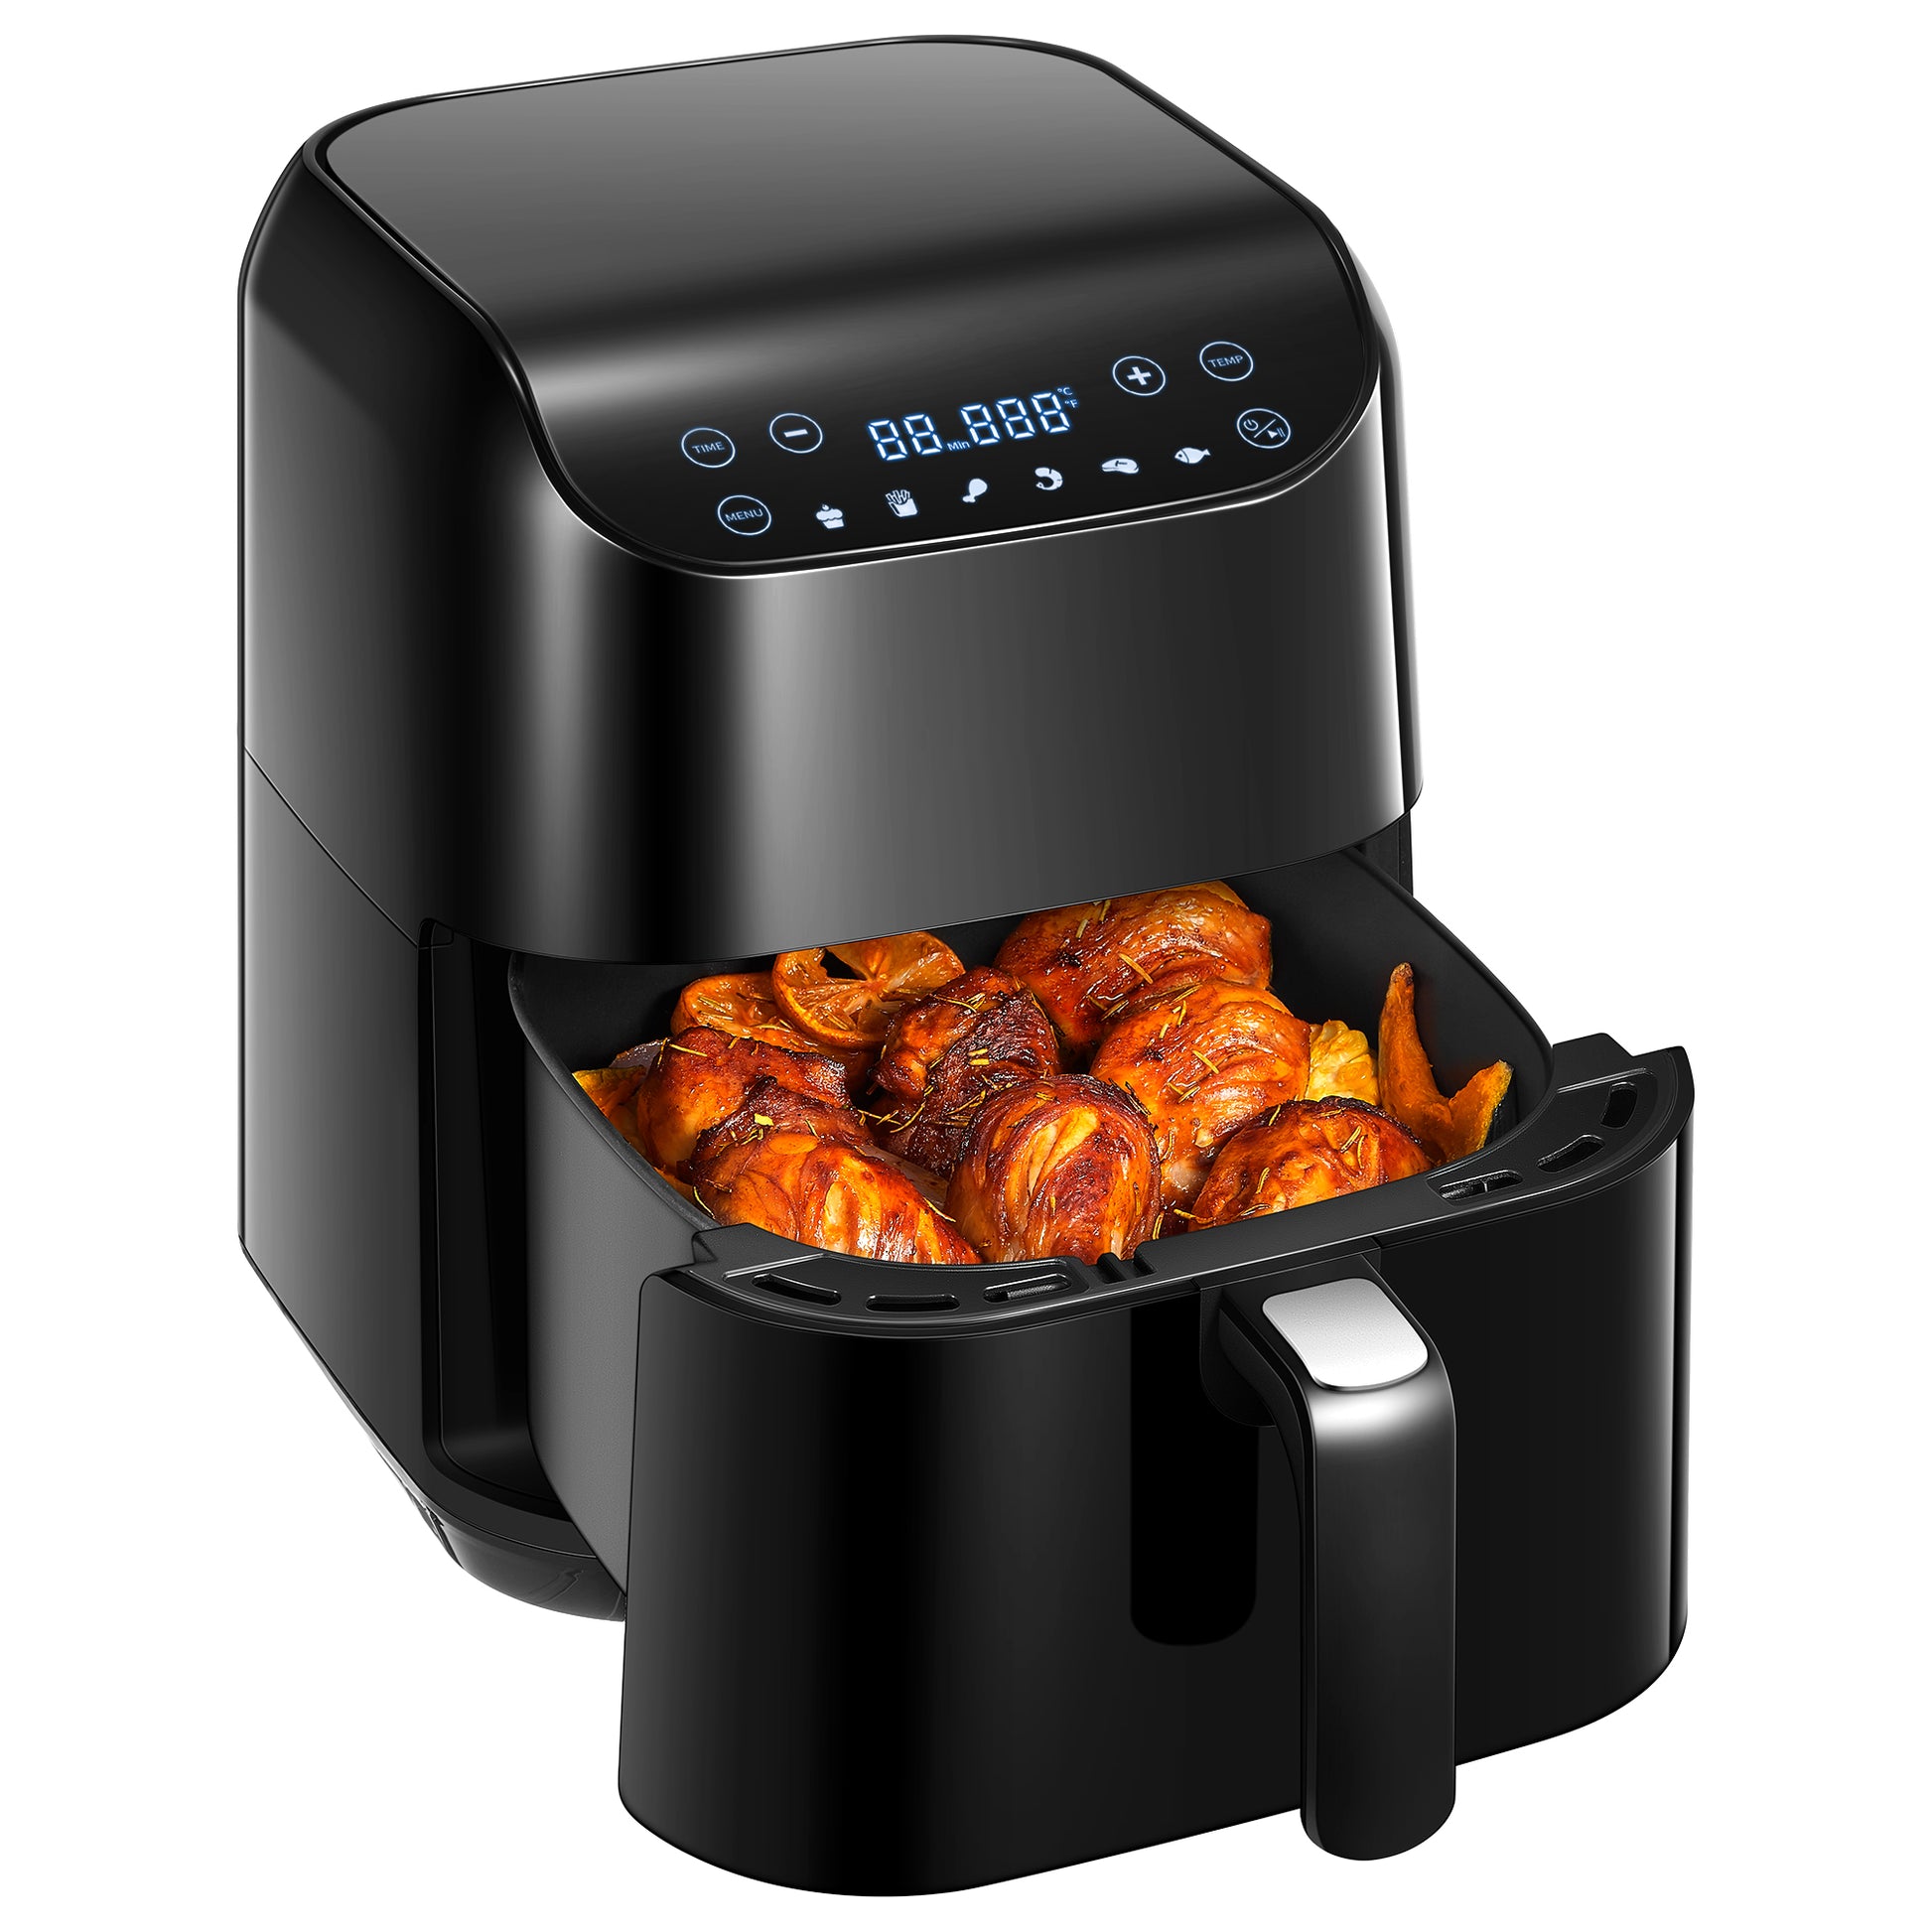 AICOOK 6&8qt Air Fryer Lid for Instant Pot, 1000W, 7 in 1 Air Fryer Lid  with LED Touchscreen, Accessories & Cookbook Included